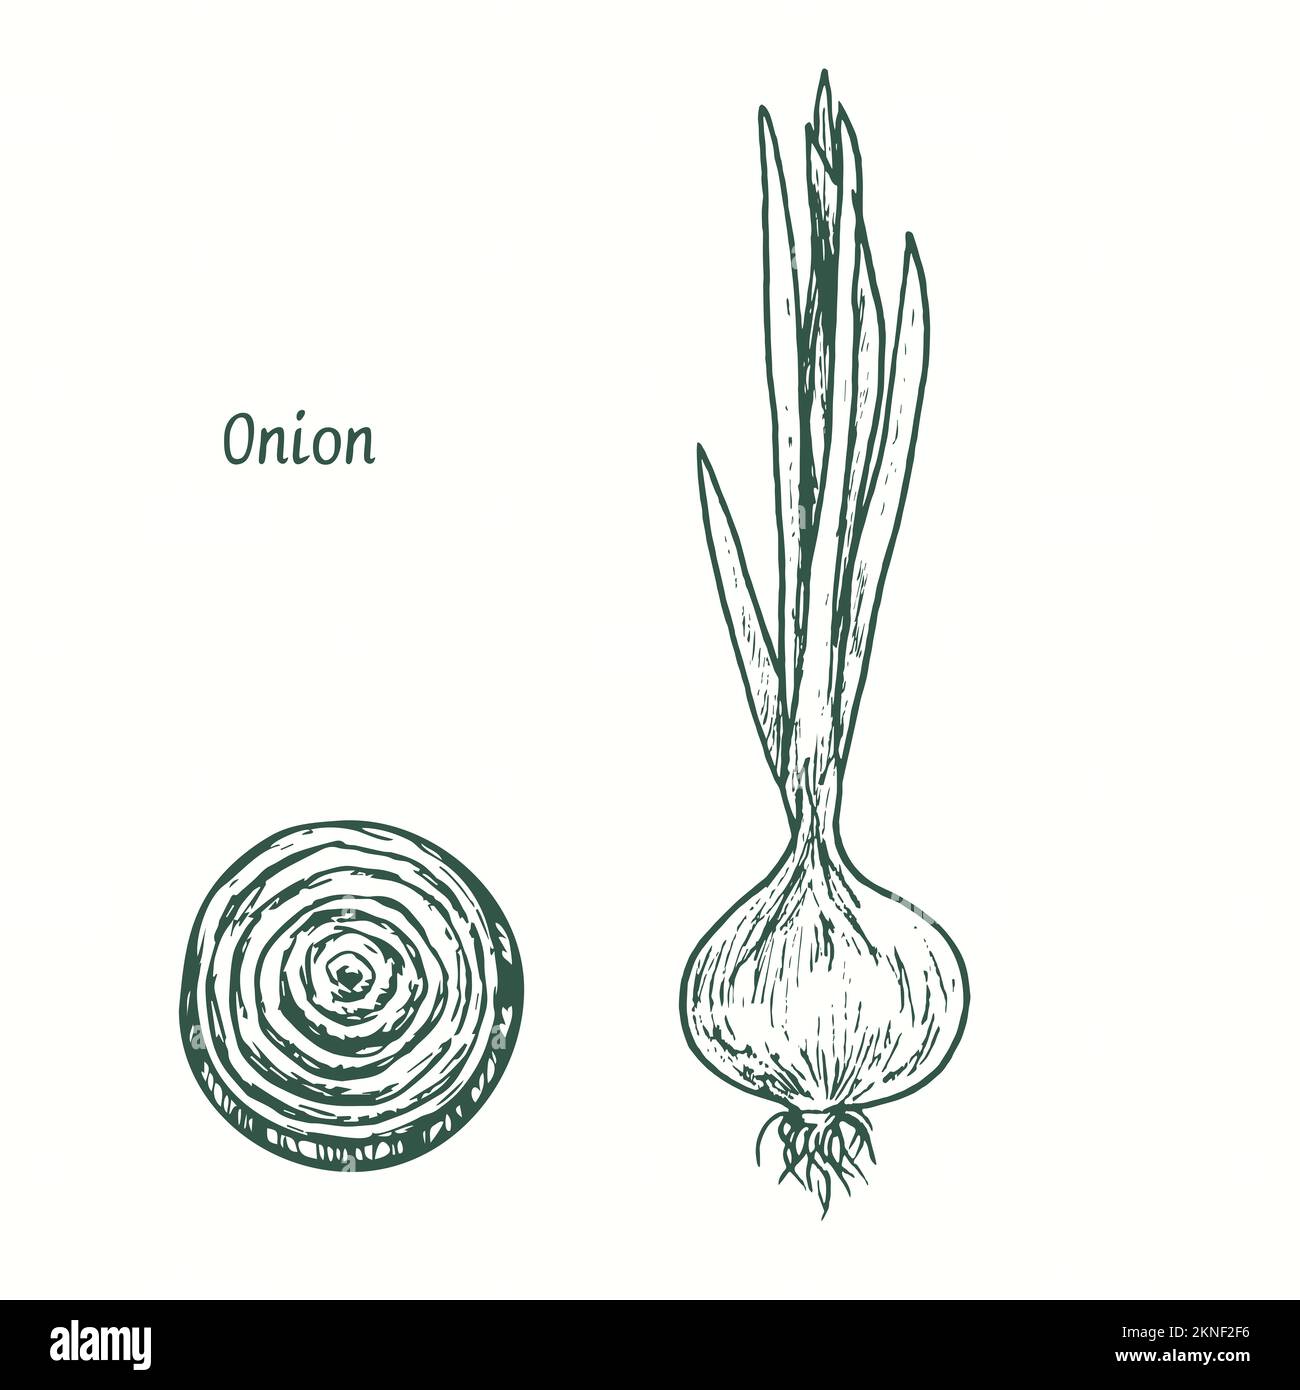 Onion plant and cut slice.  Ink black and white doodle drawing in woodcut style Stock Photo